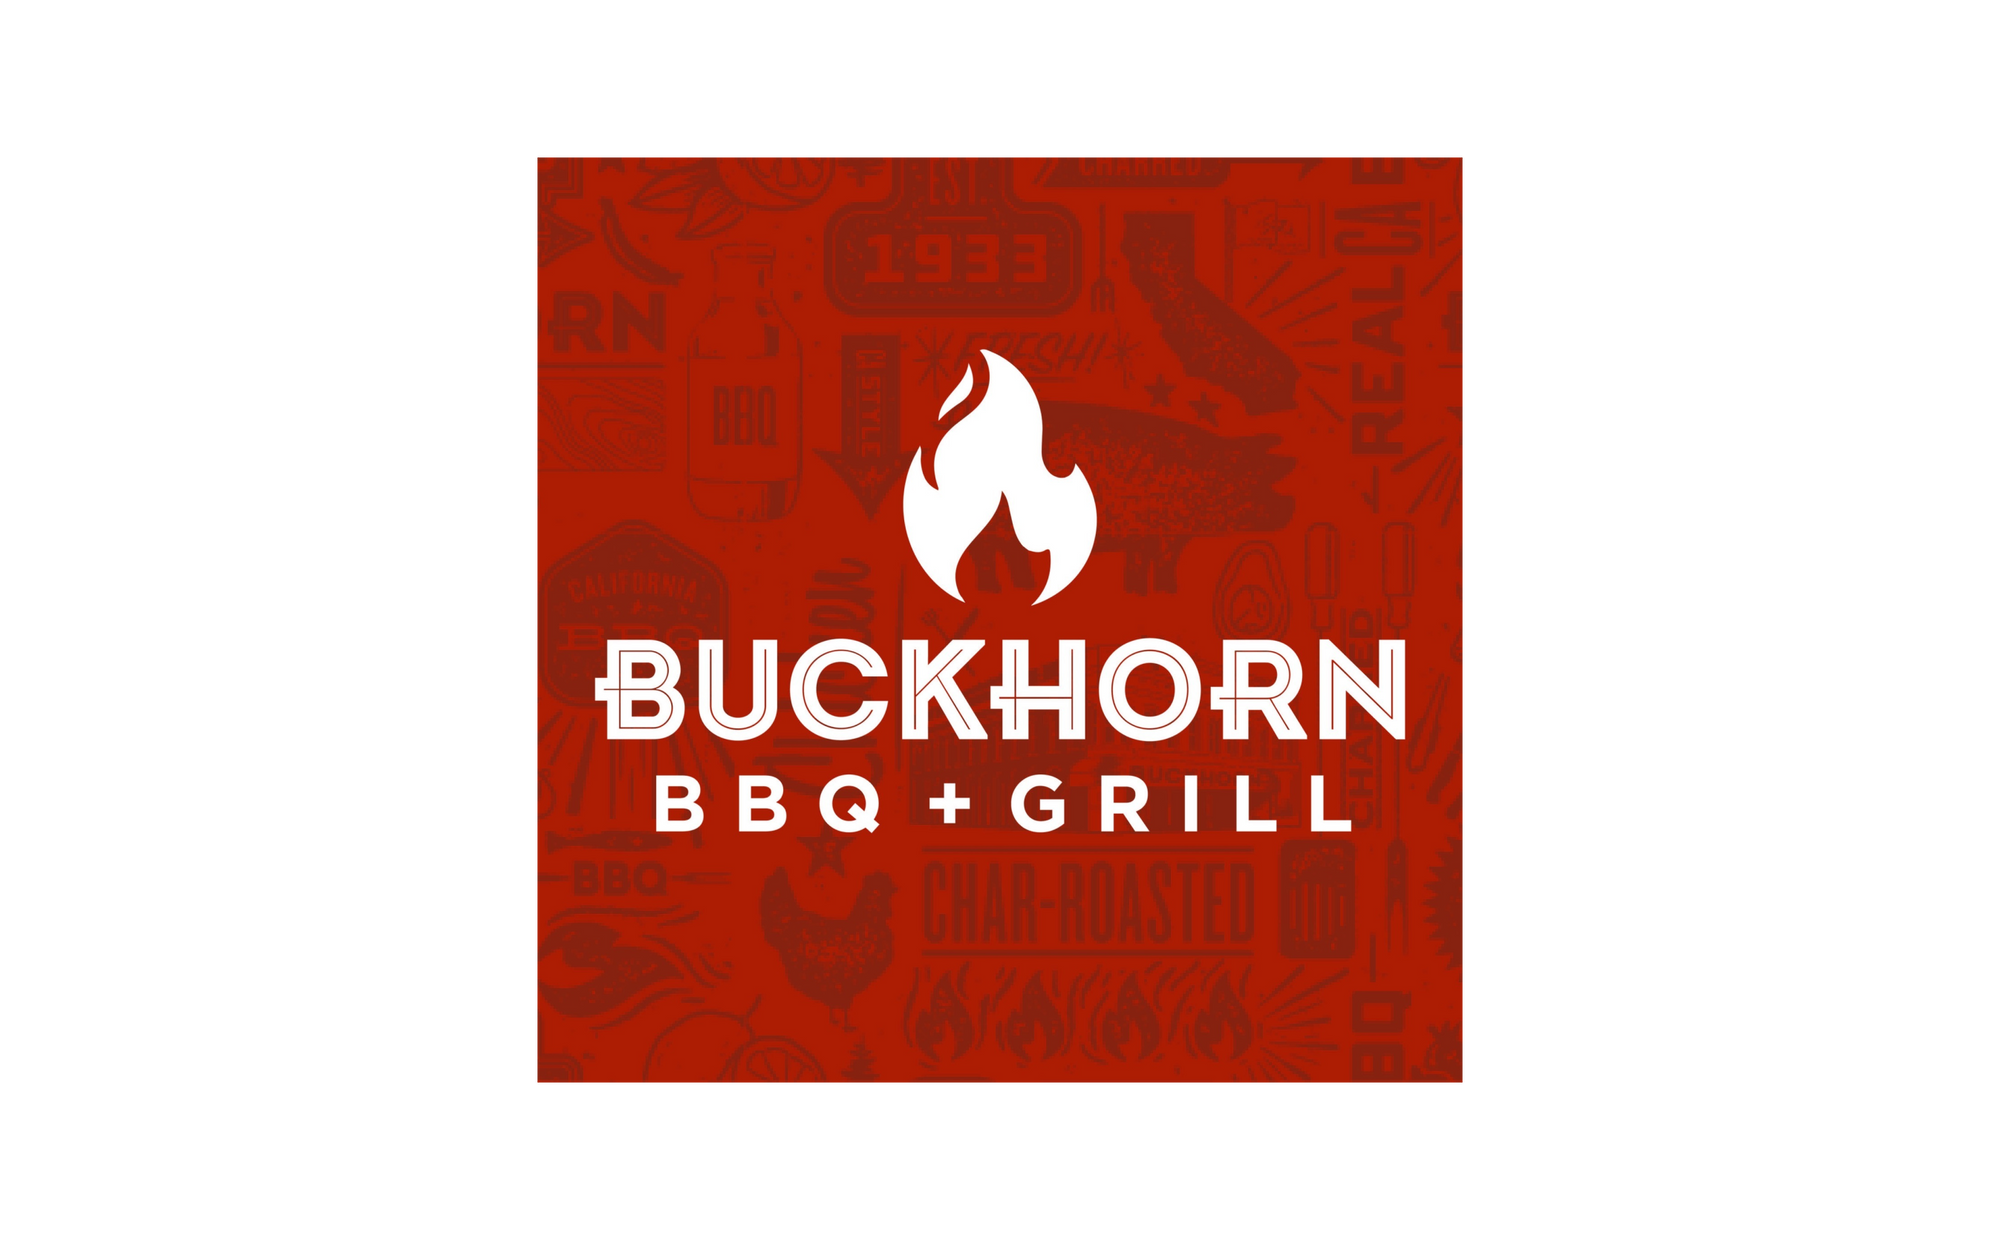 Passion, Inclusion, and Consistency - Buckhorn BBQ+Grill